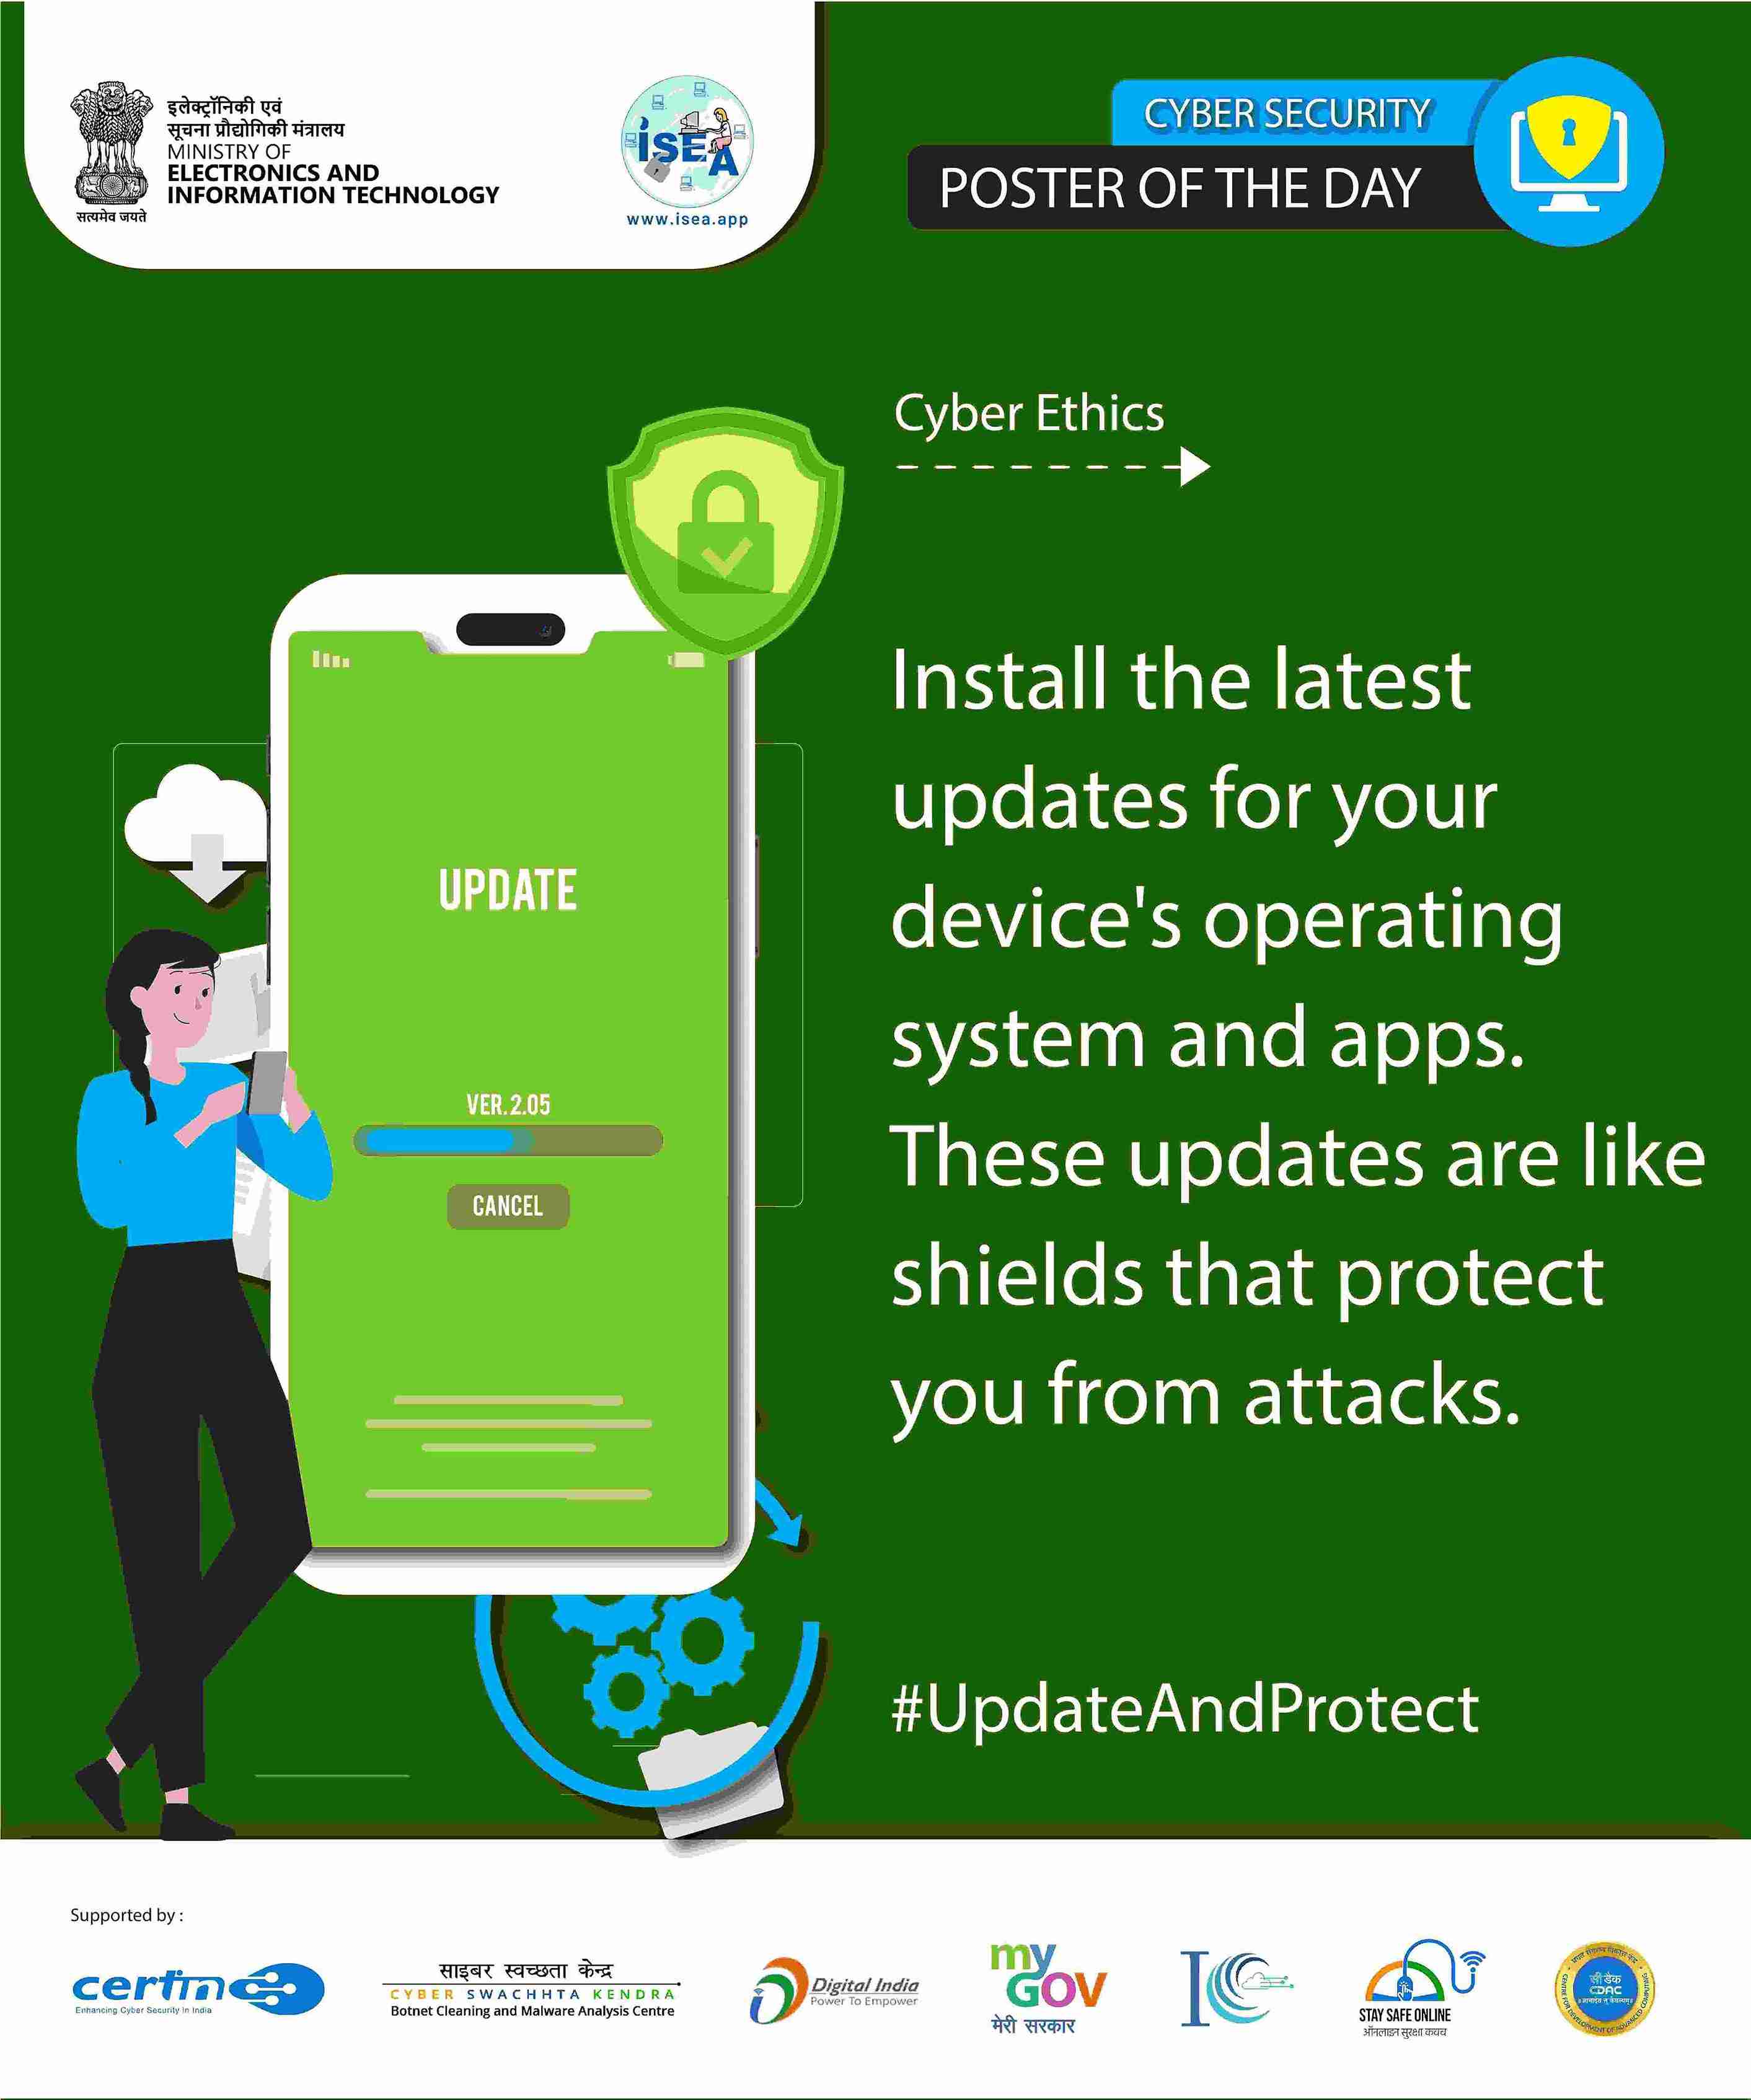 Update and Protect